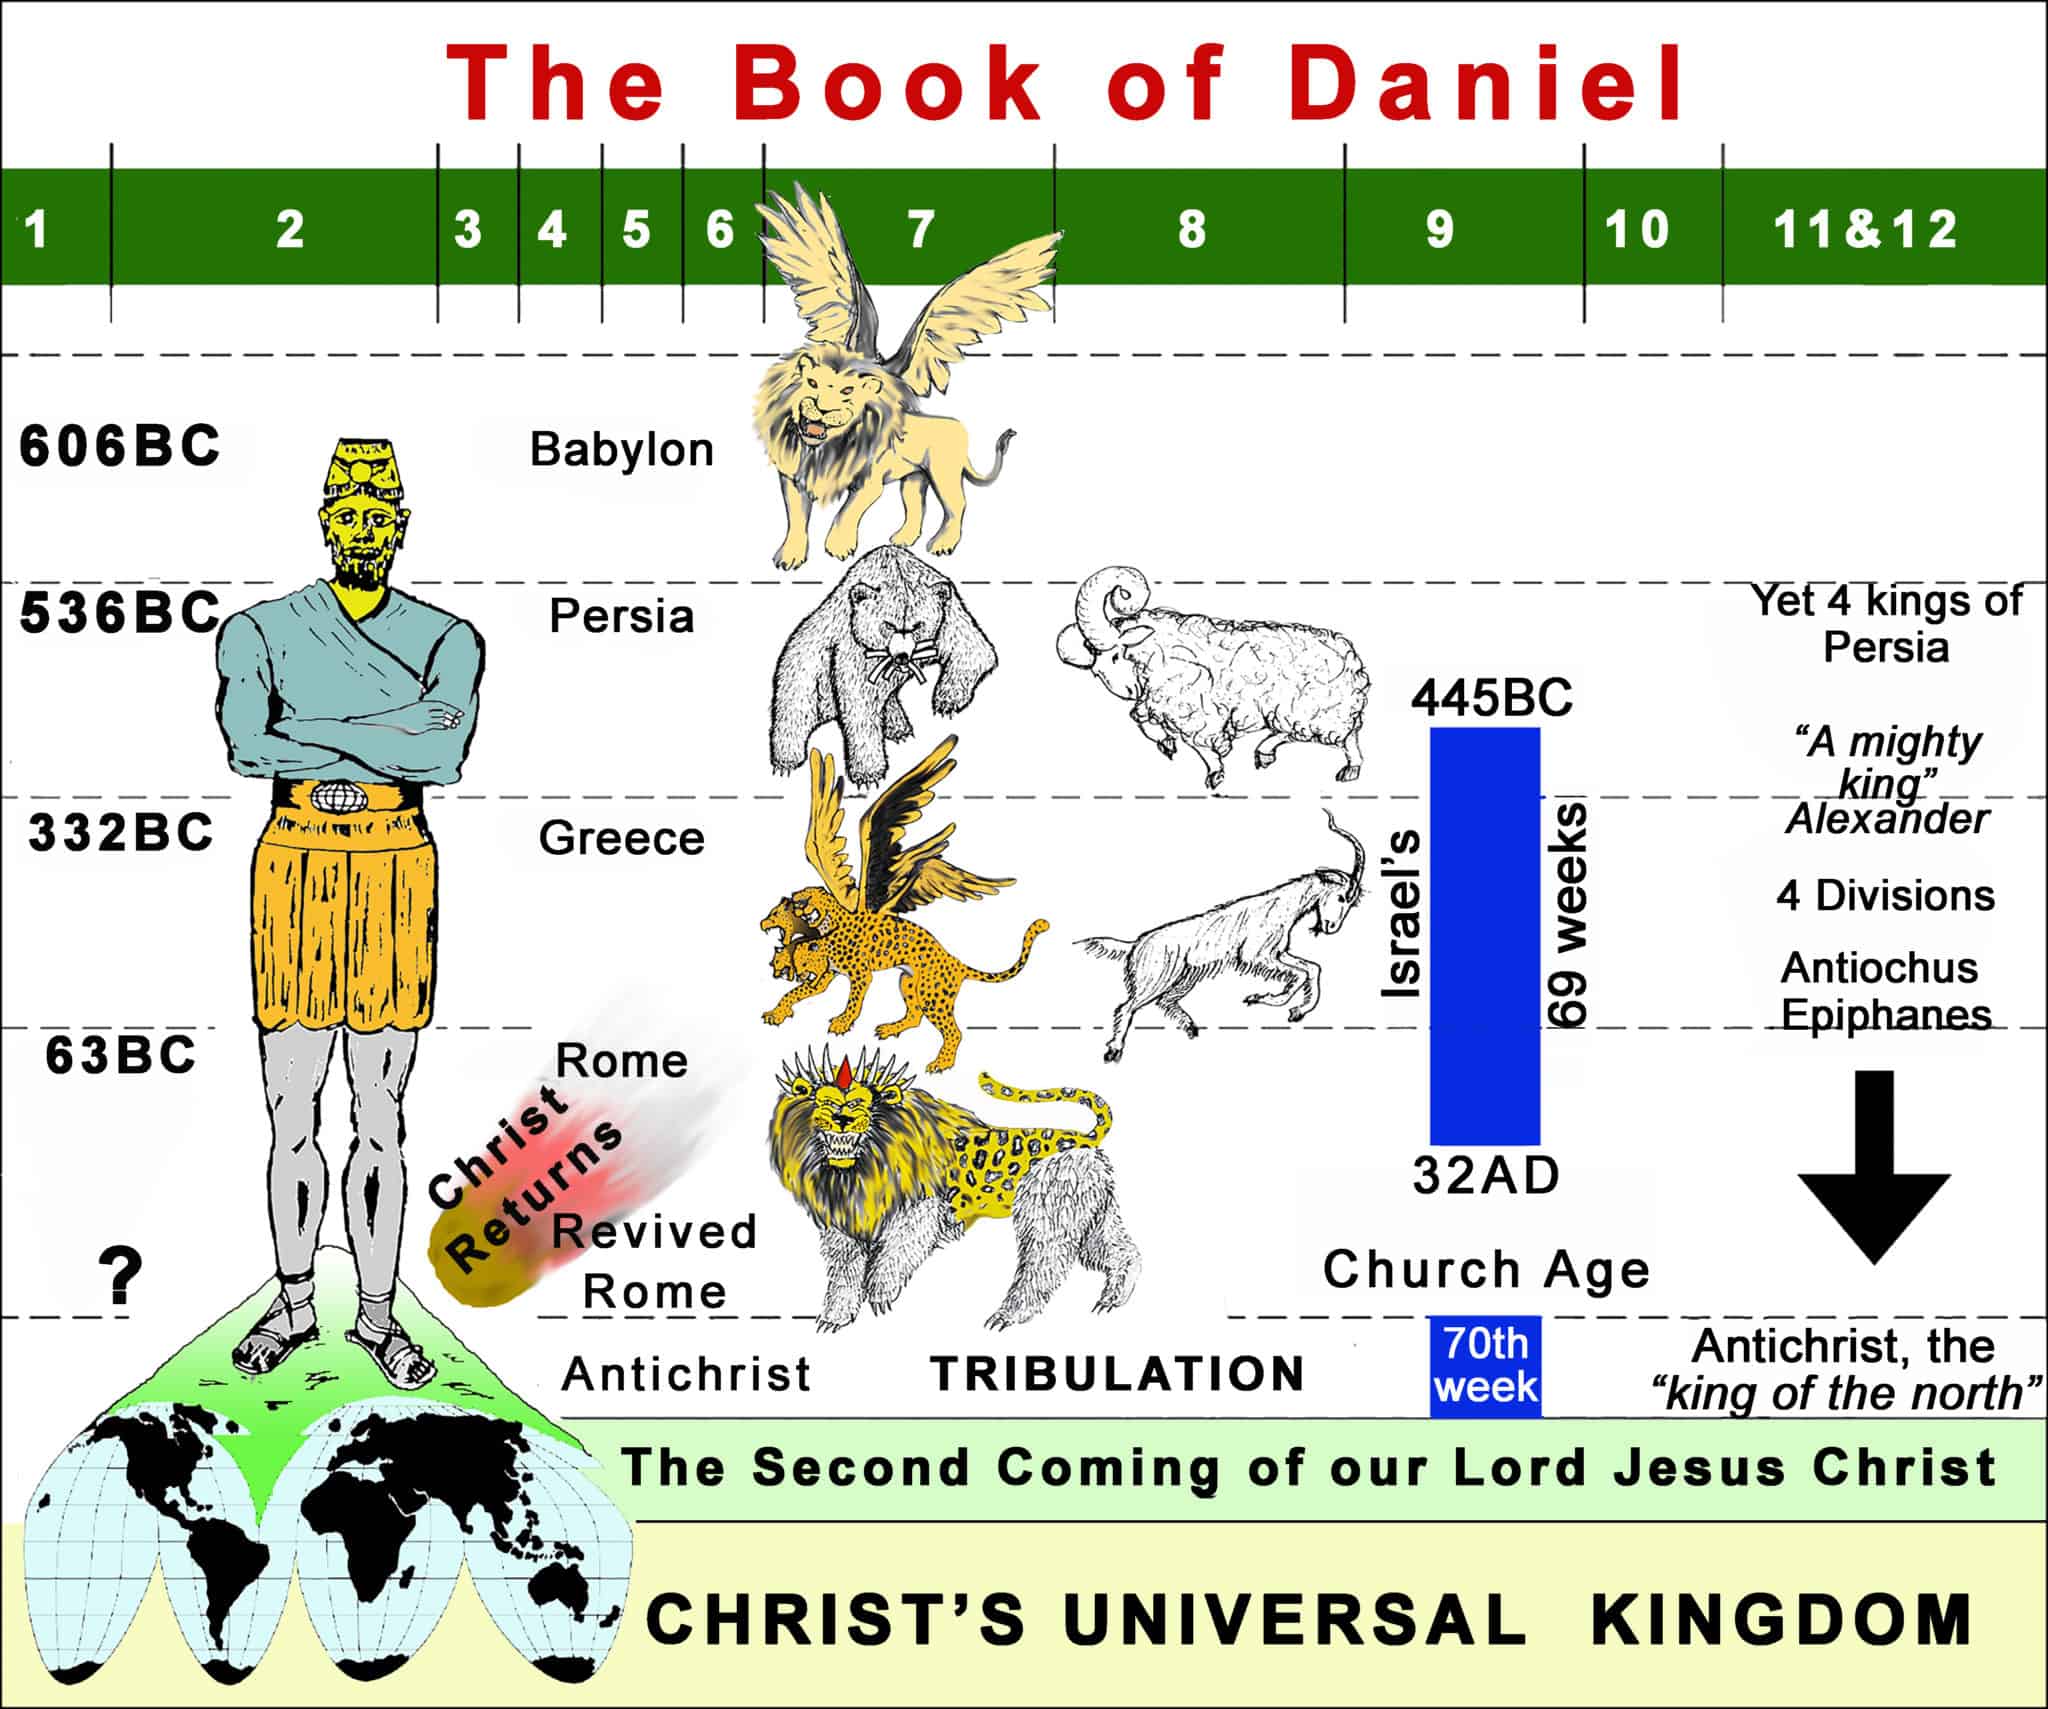 THE BOOK OF DANIEL EXPLAINED